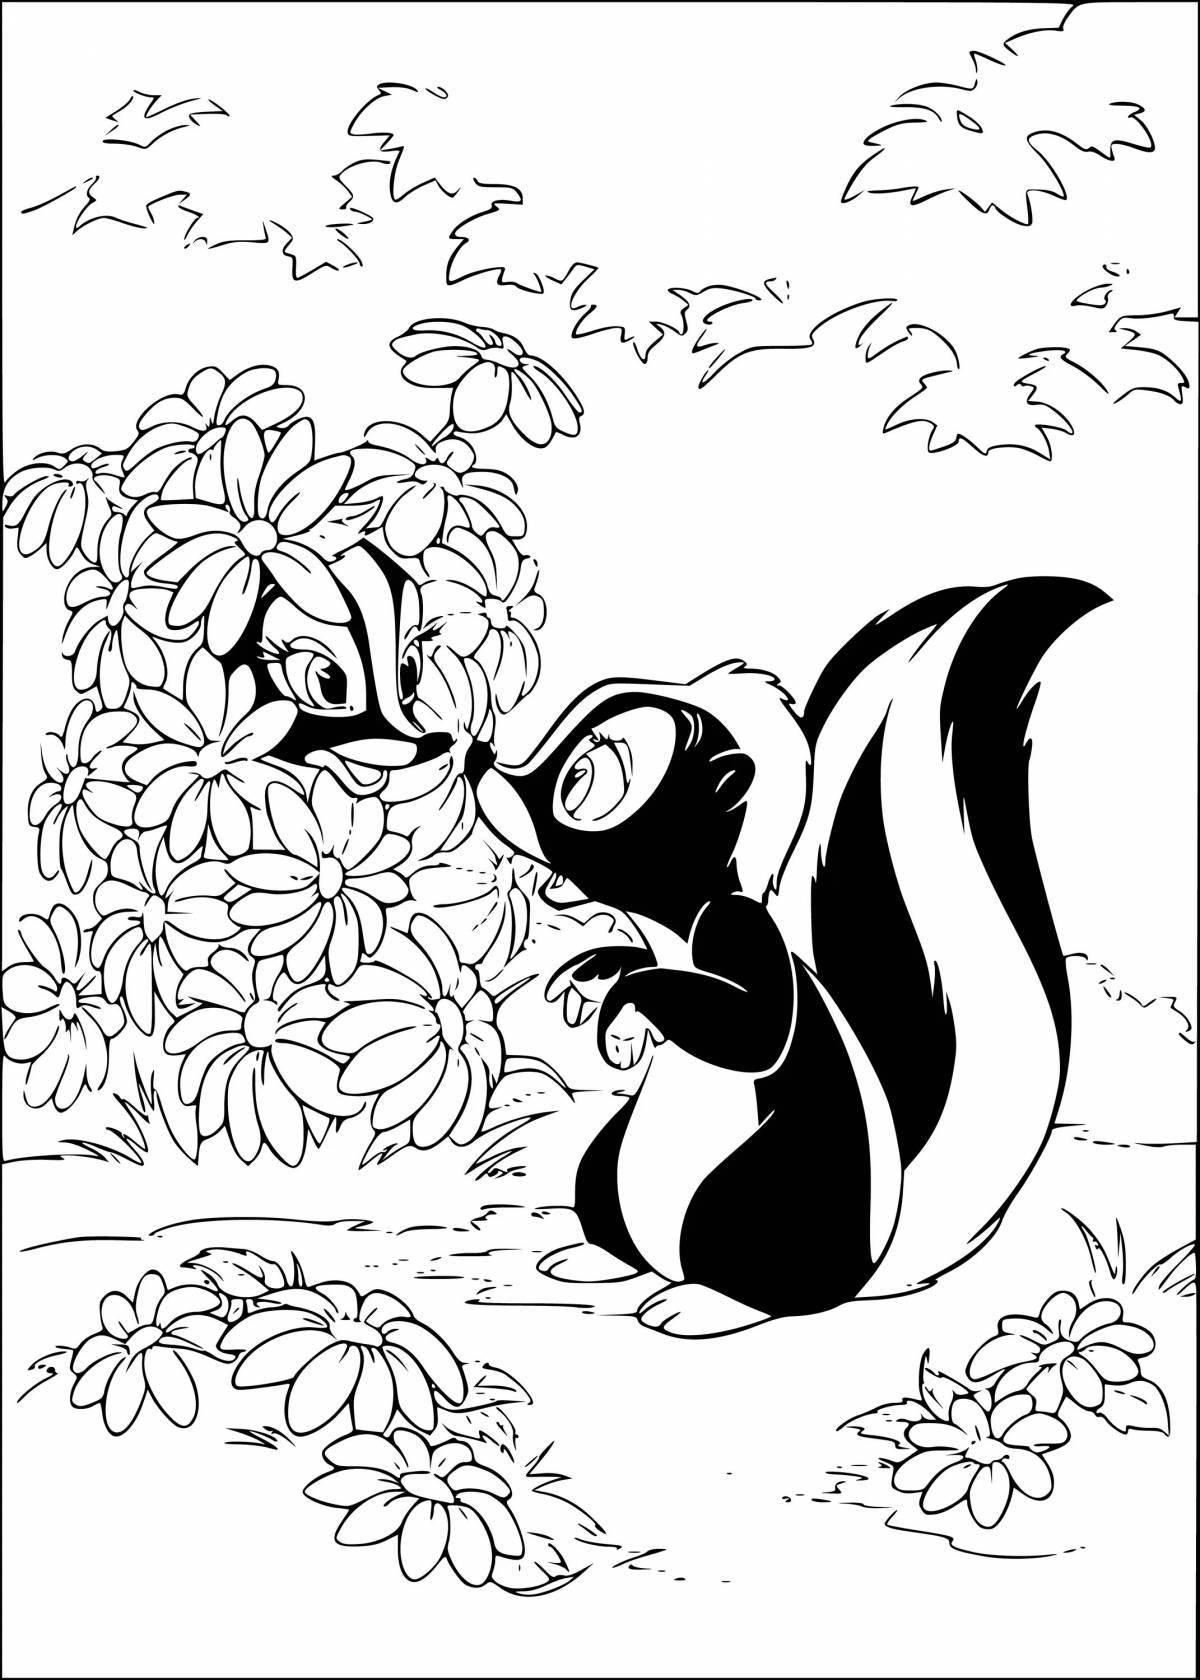 Naughty skunk coloring page